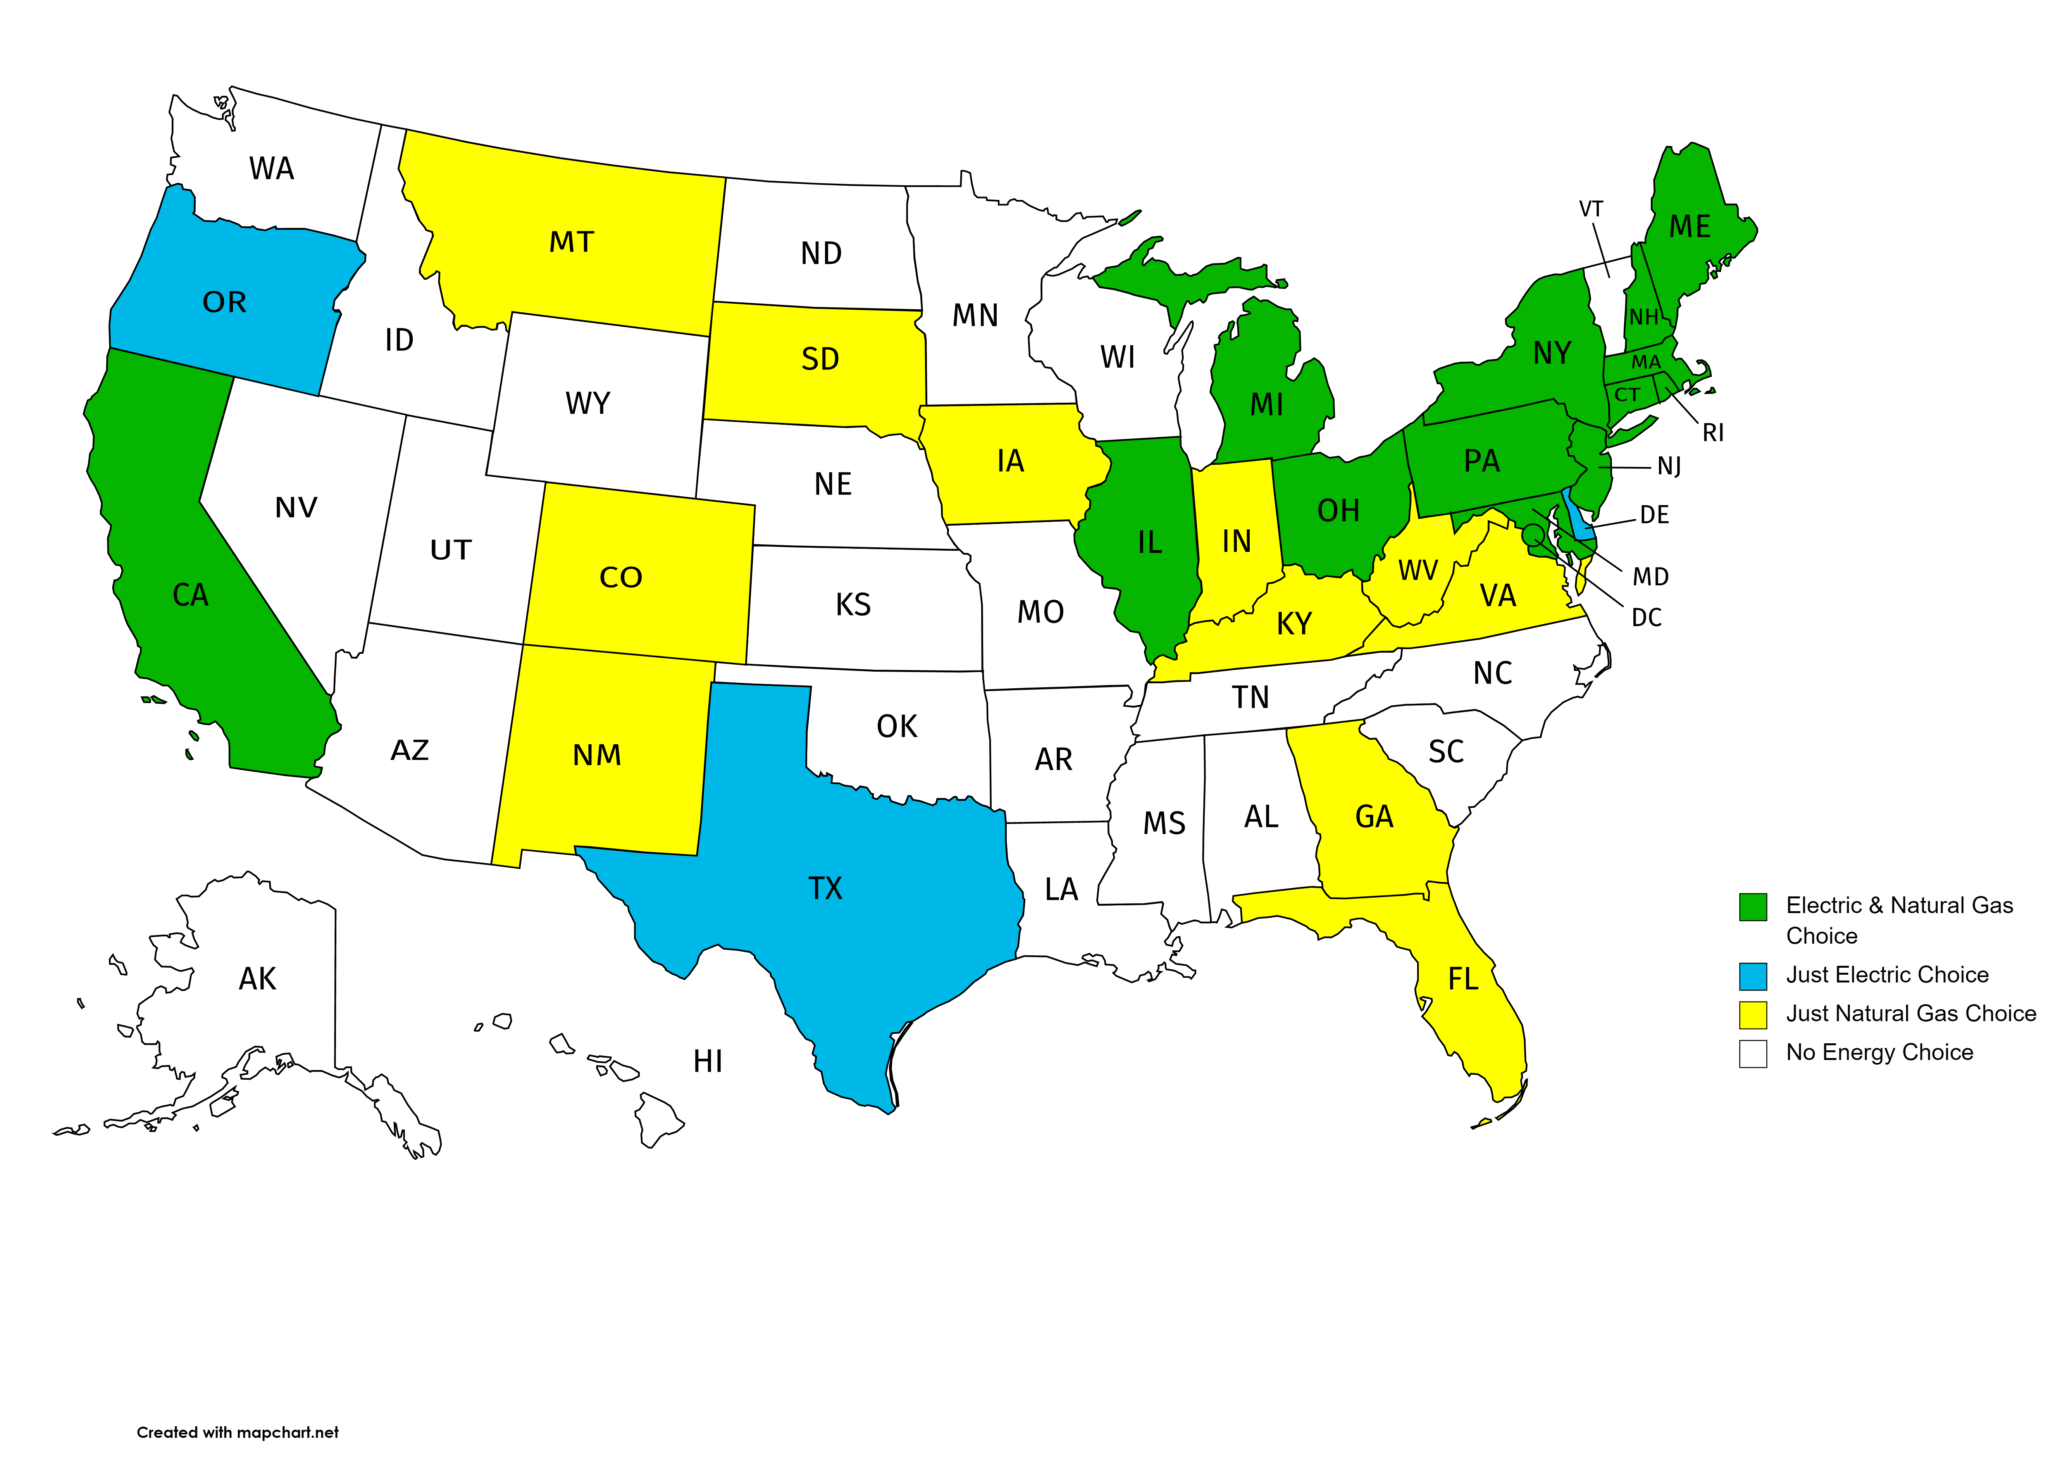 map of deregulated energy states